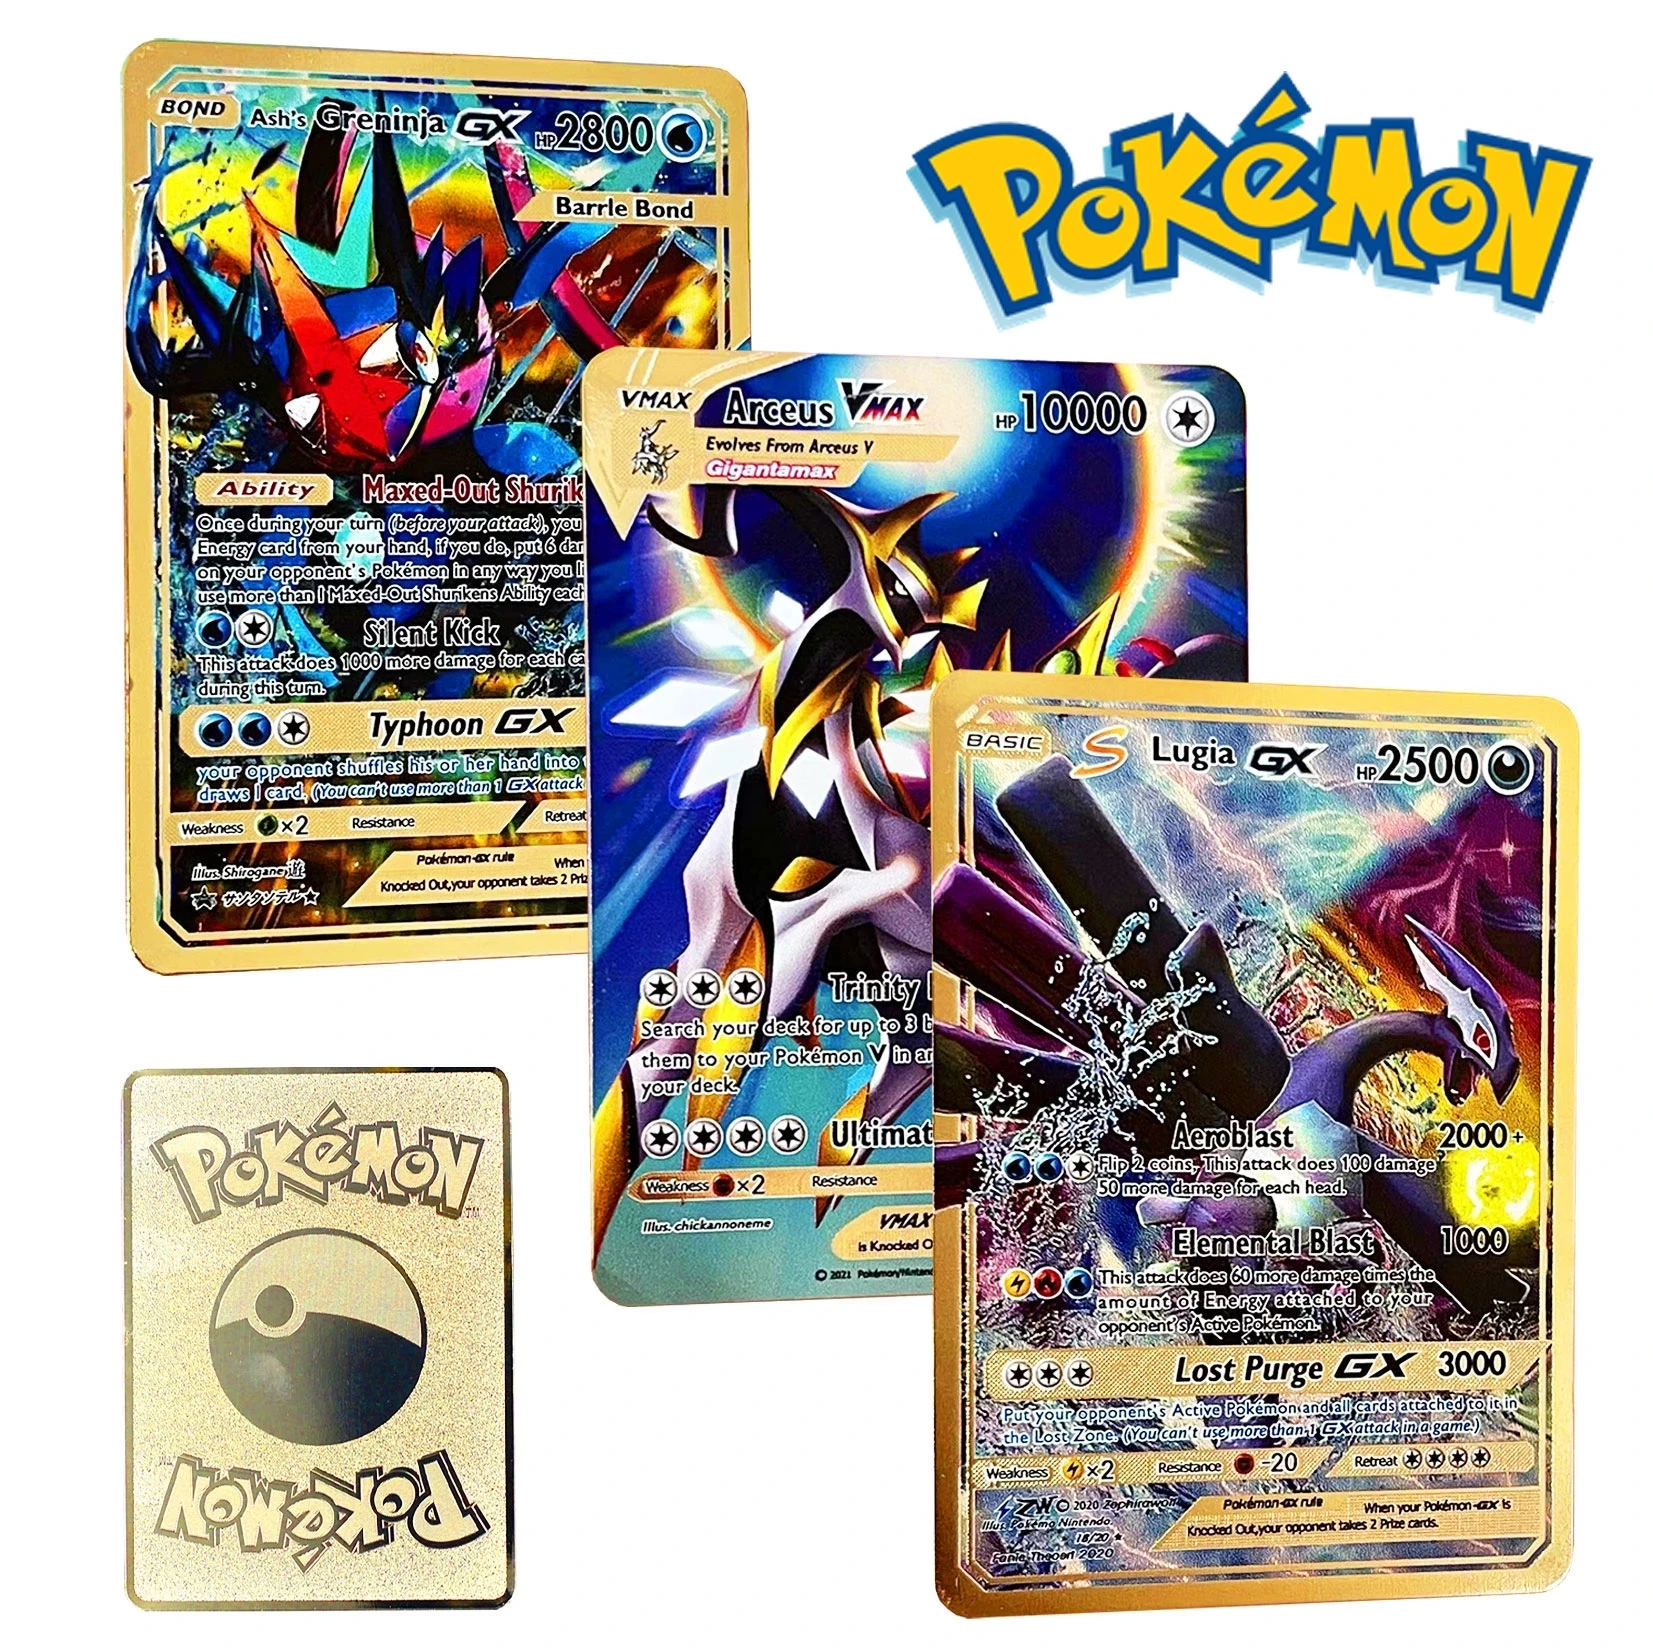 Pokemon Iron Cards Vmax Metal Pokemon Letters Pikachu Mewtwo Charizard Vmax Gold Metal Shiny Letters Game Collection Card Toys